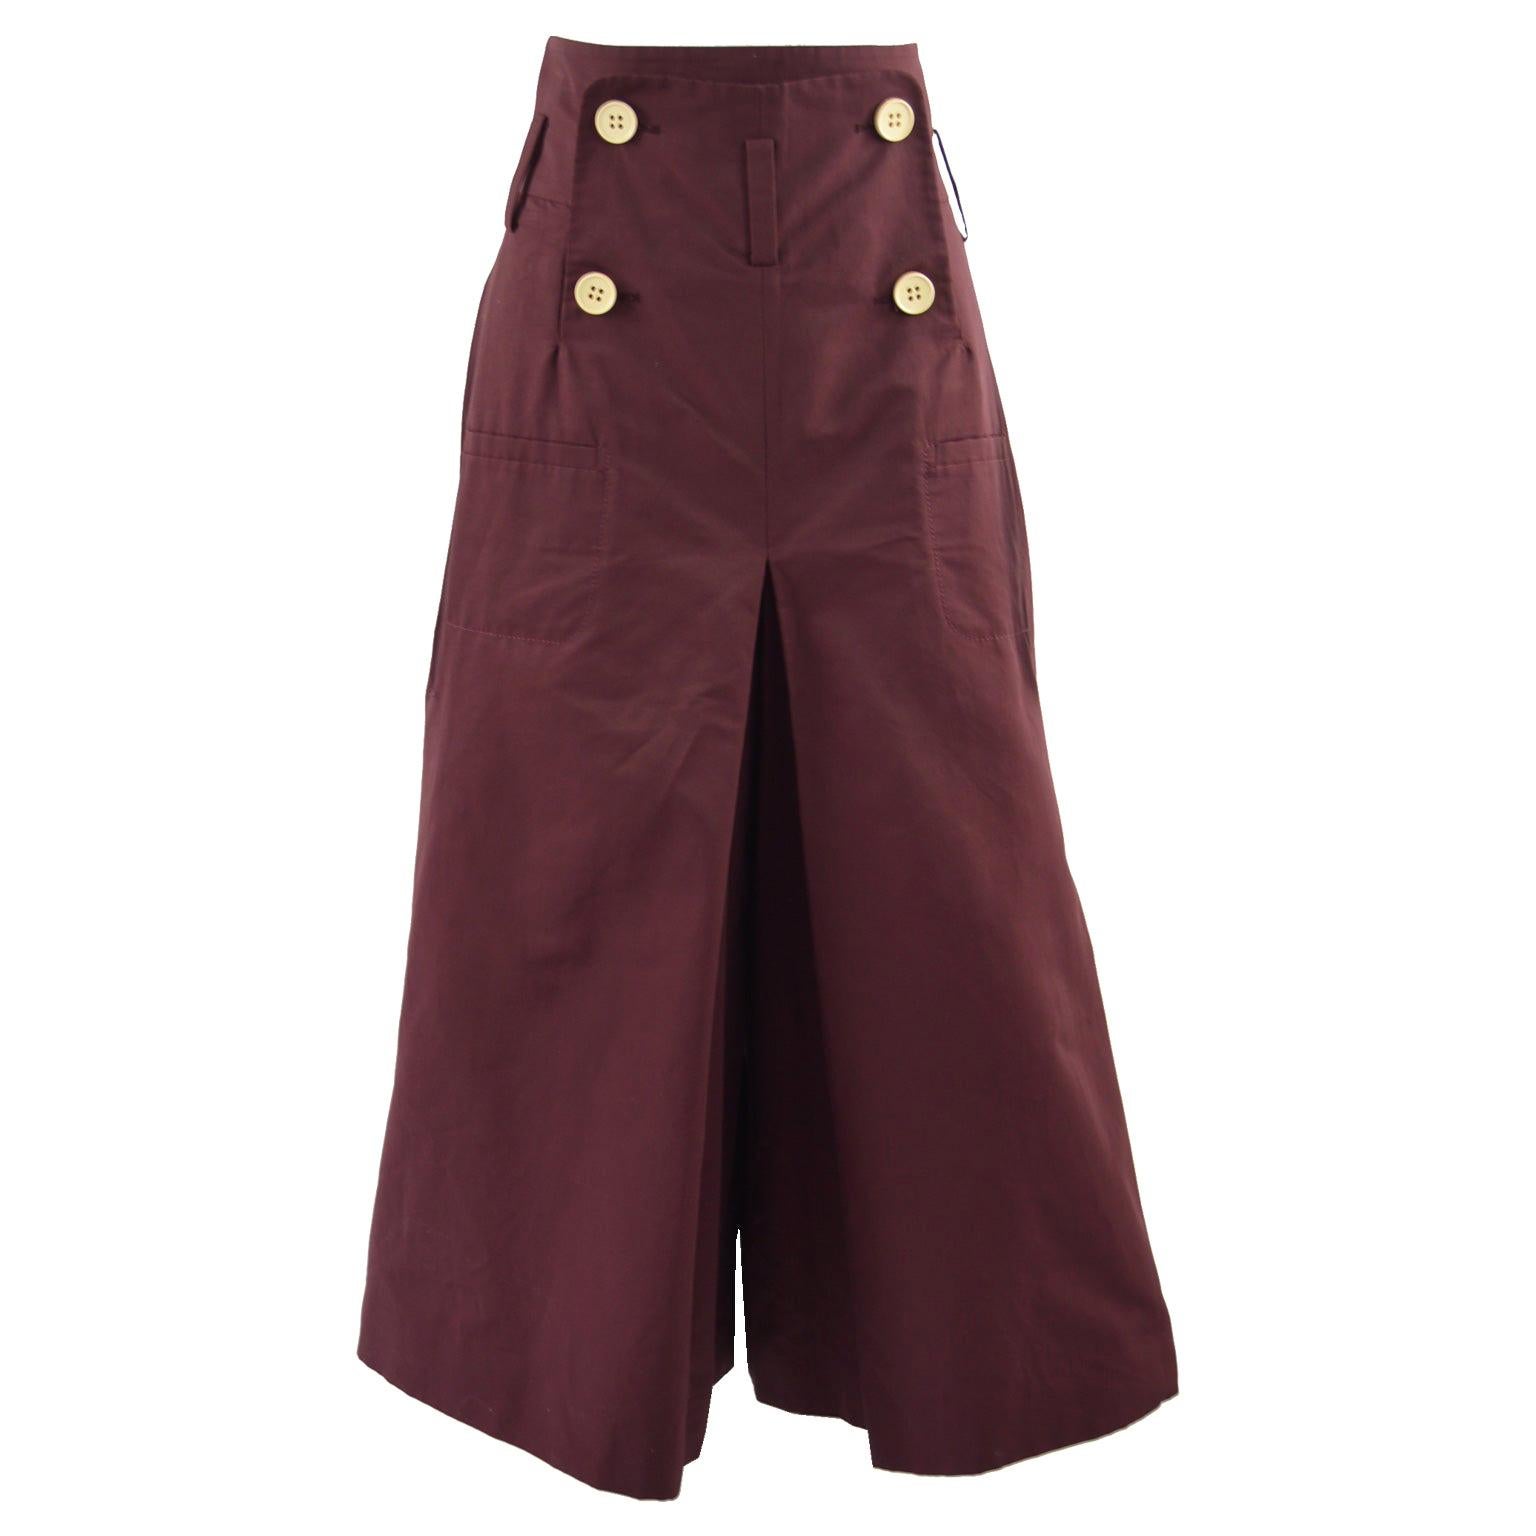 Sonia Rykiel Vintage Ultra Wide Leg High Waisted Culottes Shorts, 1990s For Sale